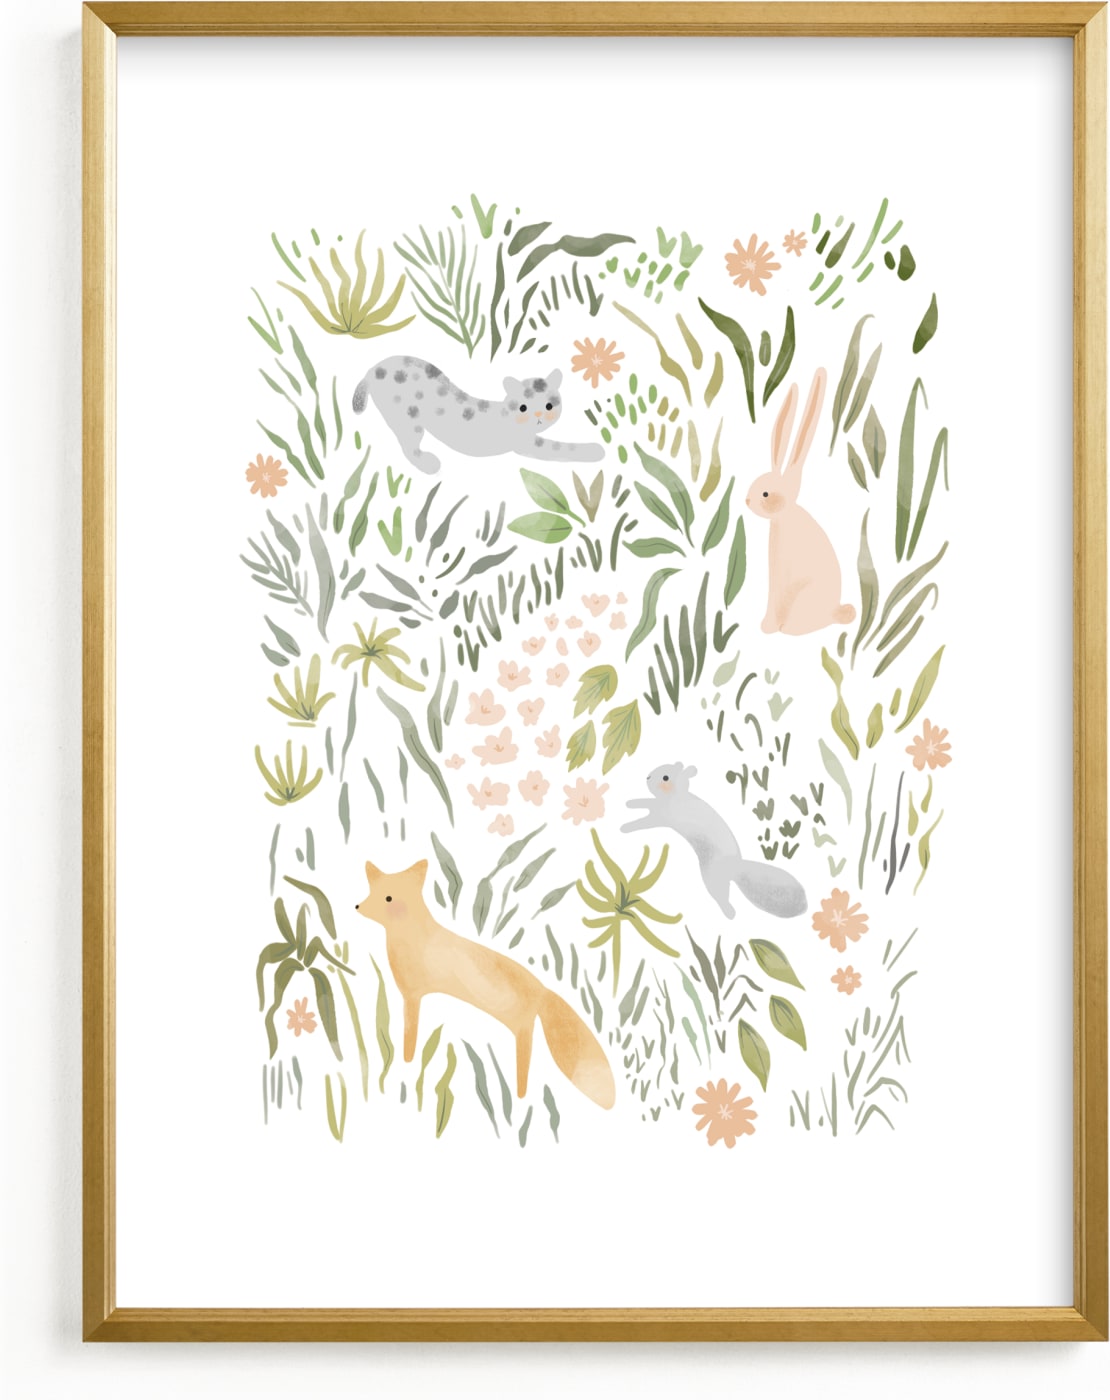 This is a colorful art by Hannah Williams called Flora and Fauna.